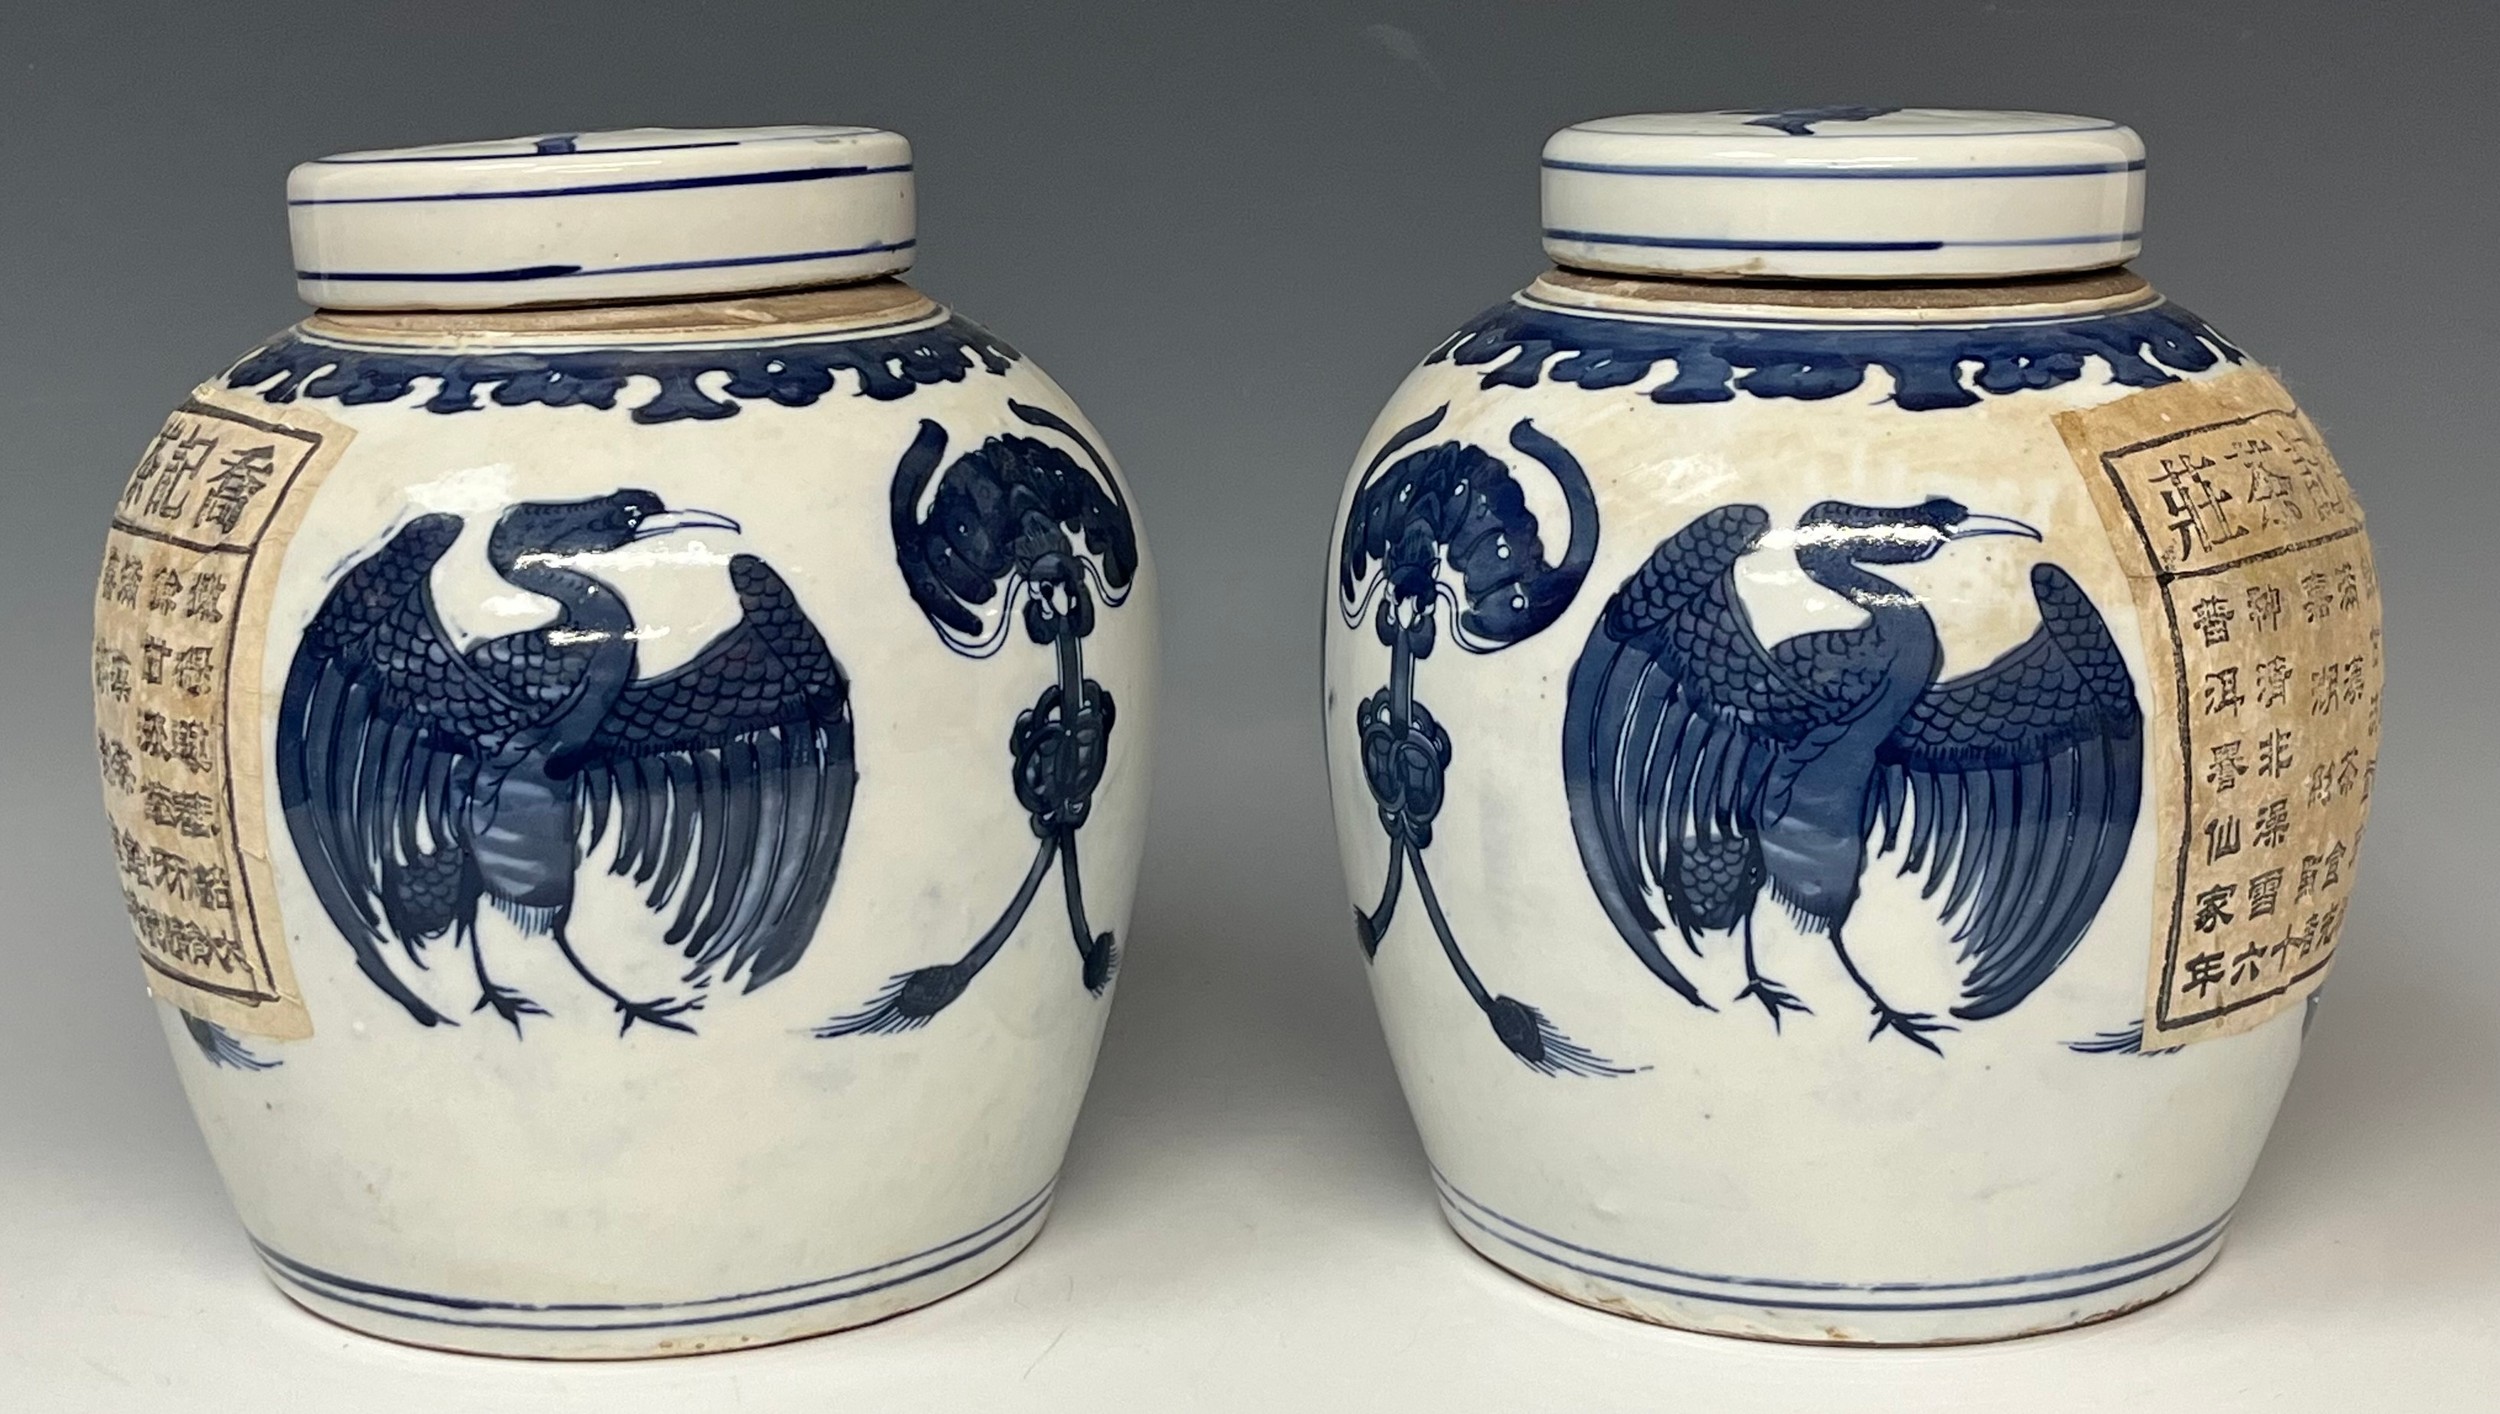 A pair of contemporary Chinese Export ware blue and white ginger jars and covers, each decorated